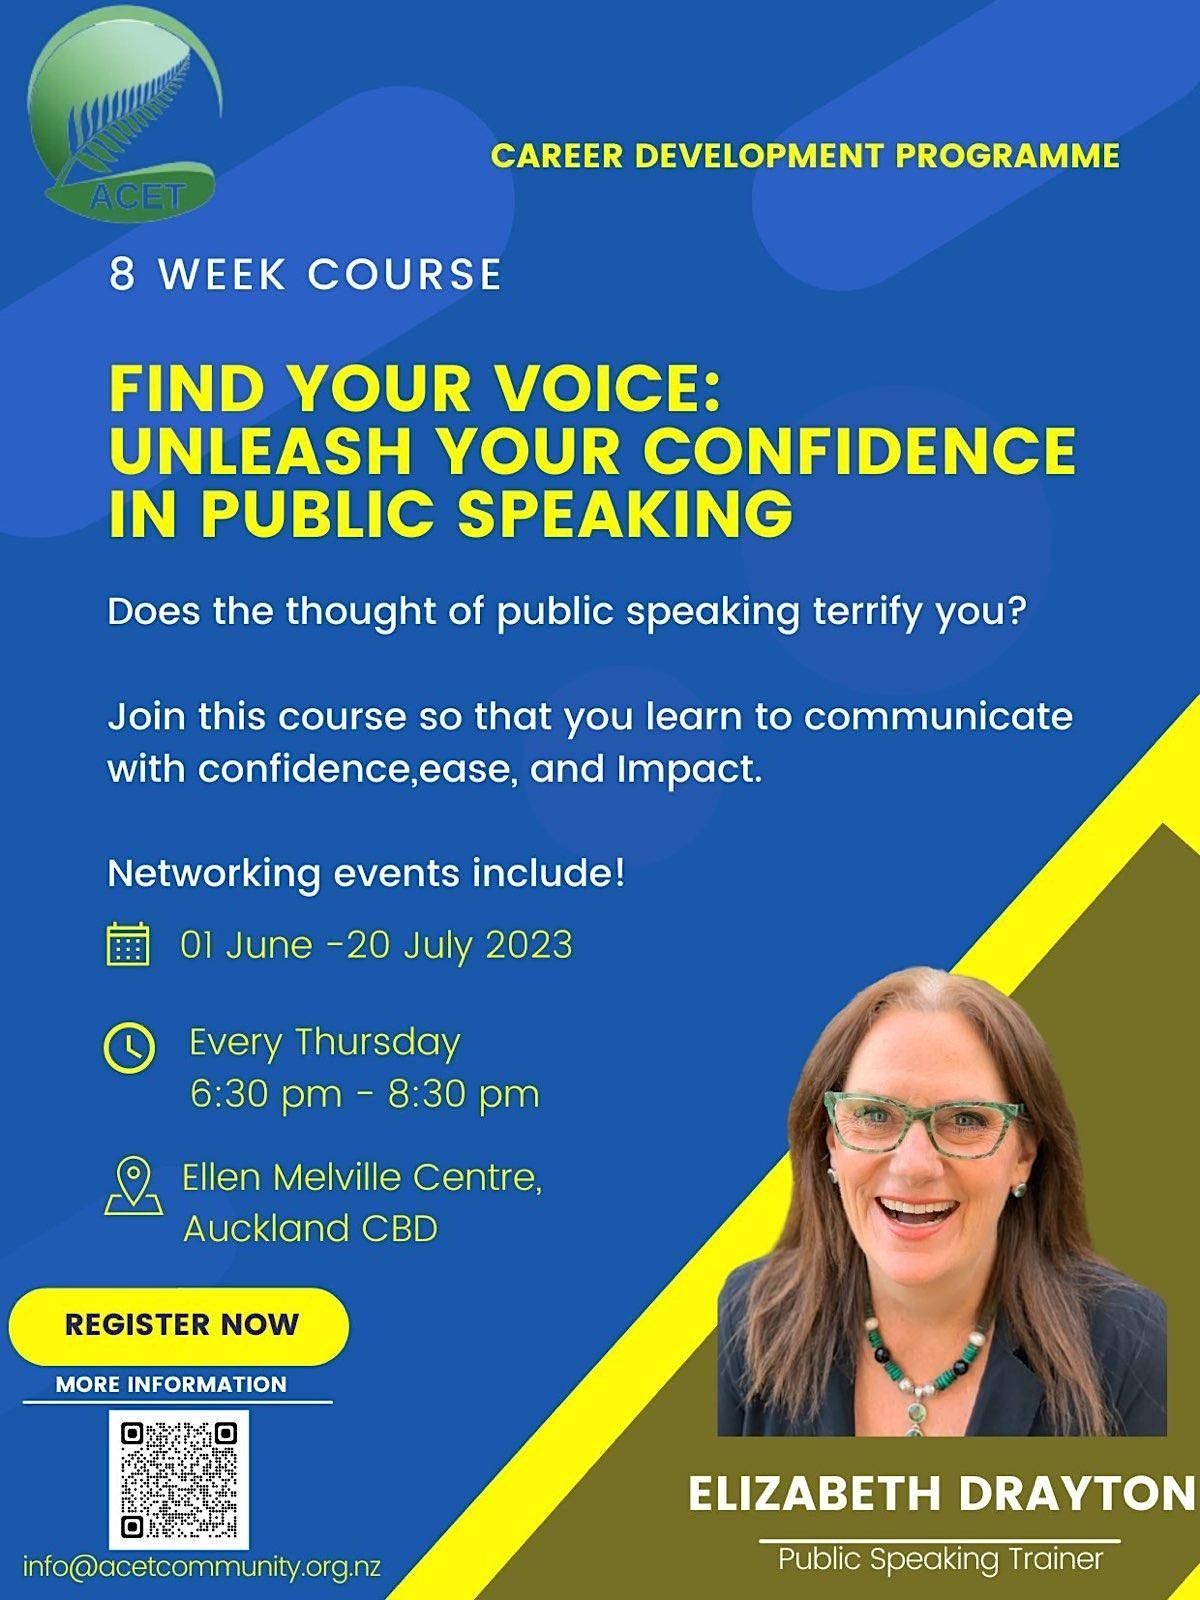 Find Your Voice: Unleash Your Confidence in Public Speaking